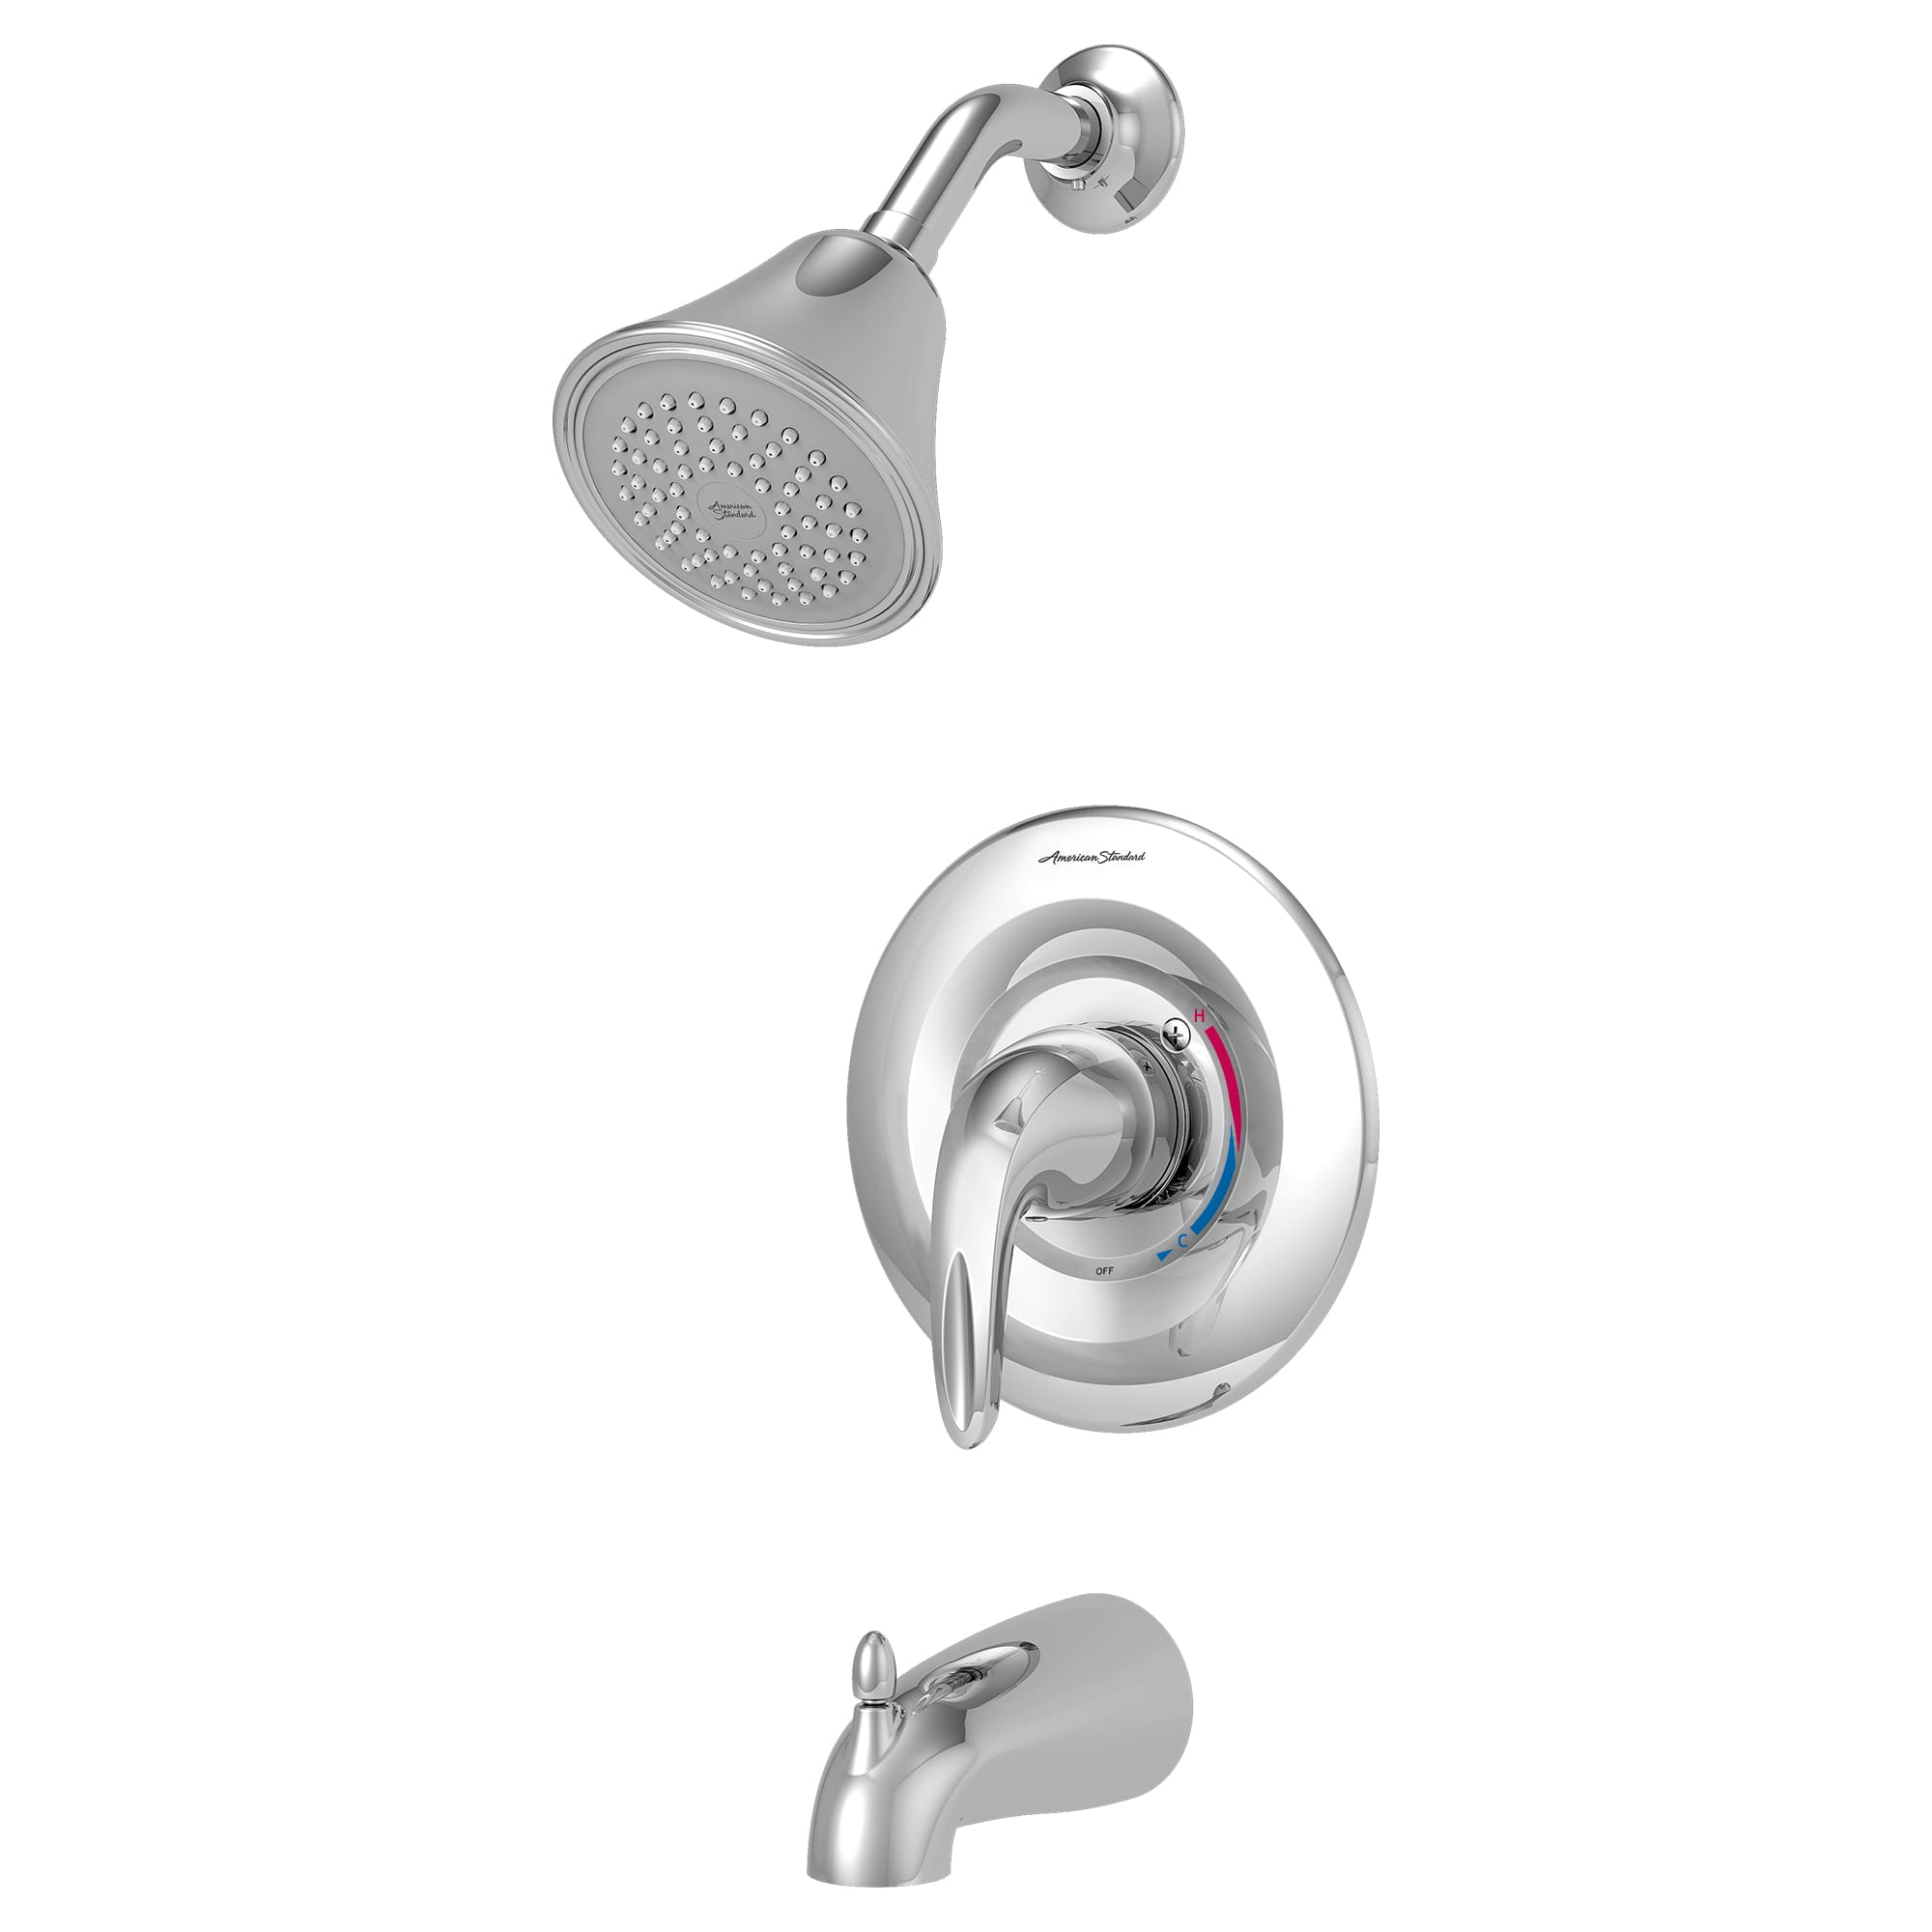 Reliant 3 25 gpm 95 L min Tub and Shower Trim Kit With Showerhead Double Ceramic Pressure Balance Cartridge With Lever Handle CHROME